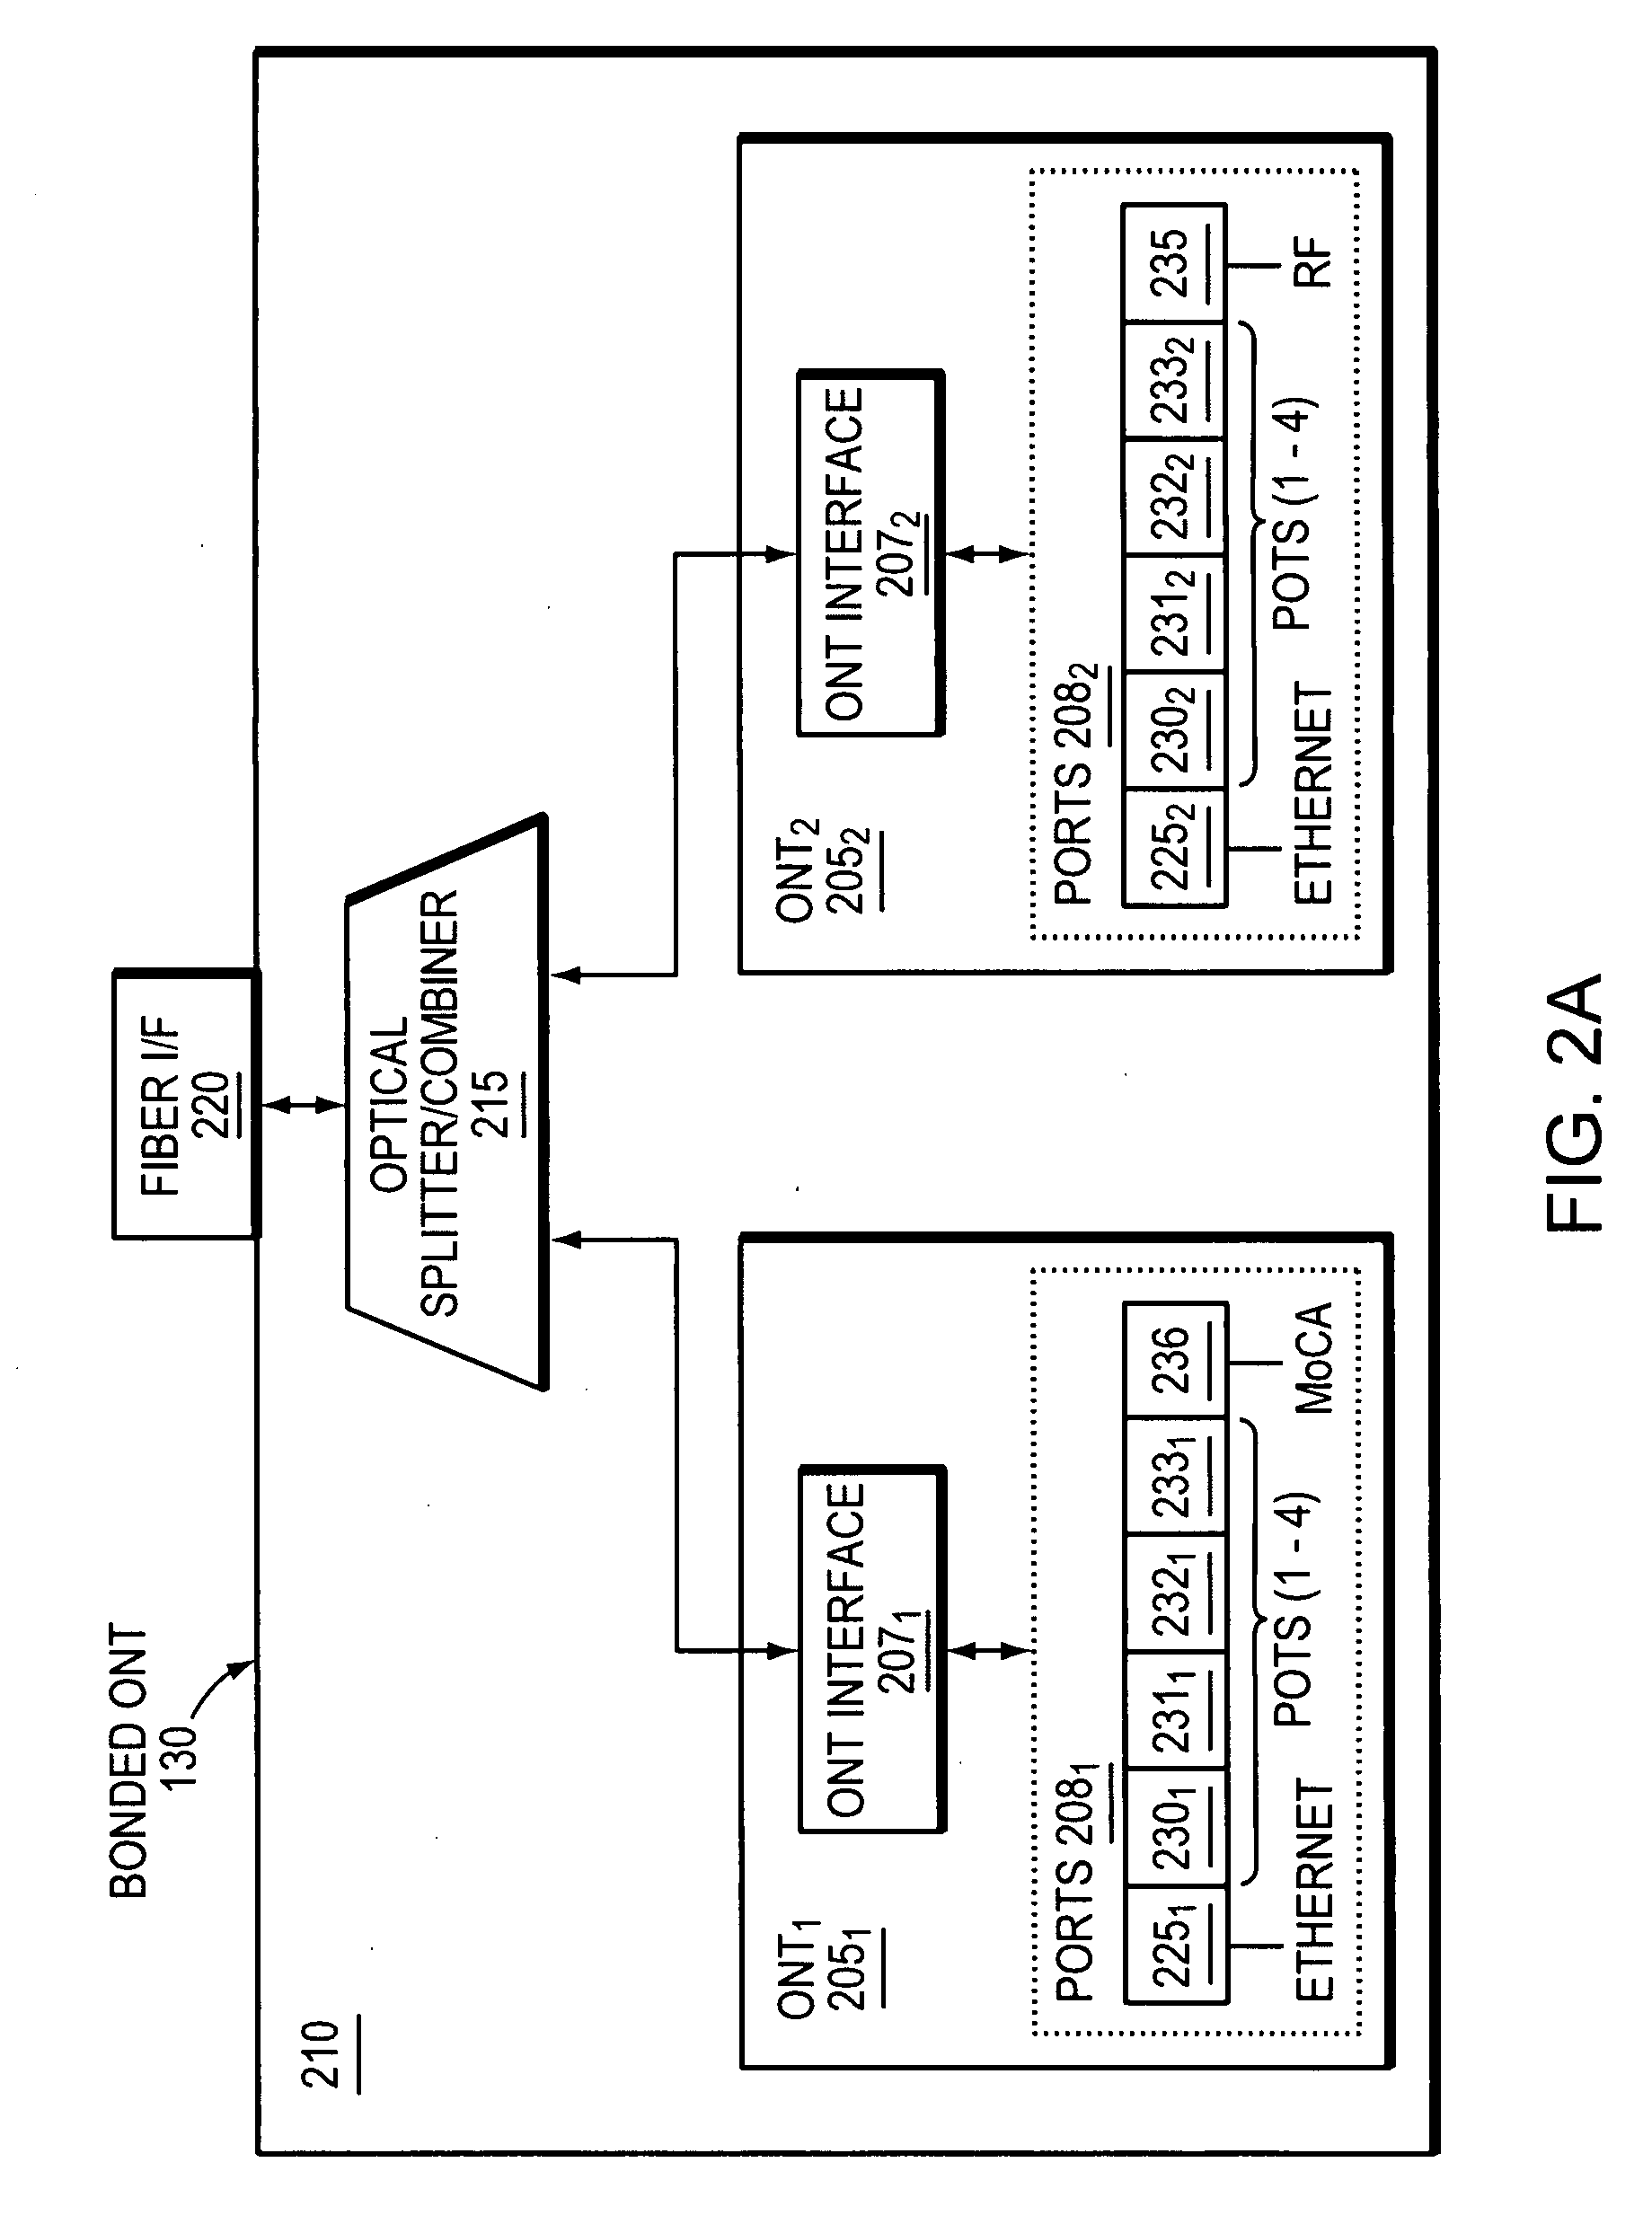 Method and apparatus to provide bonded optical network devices